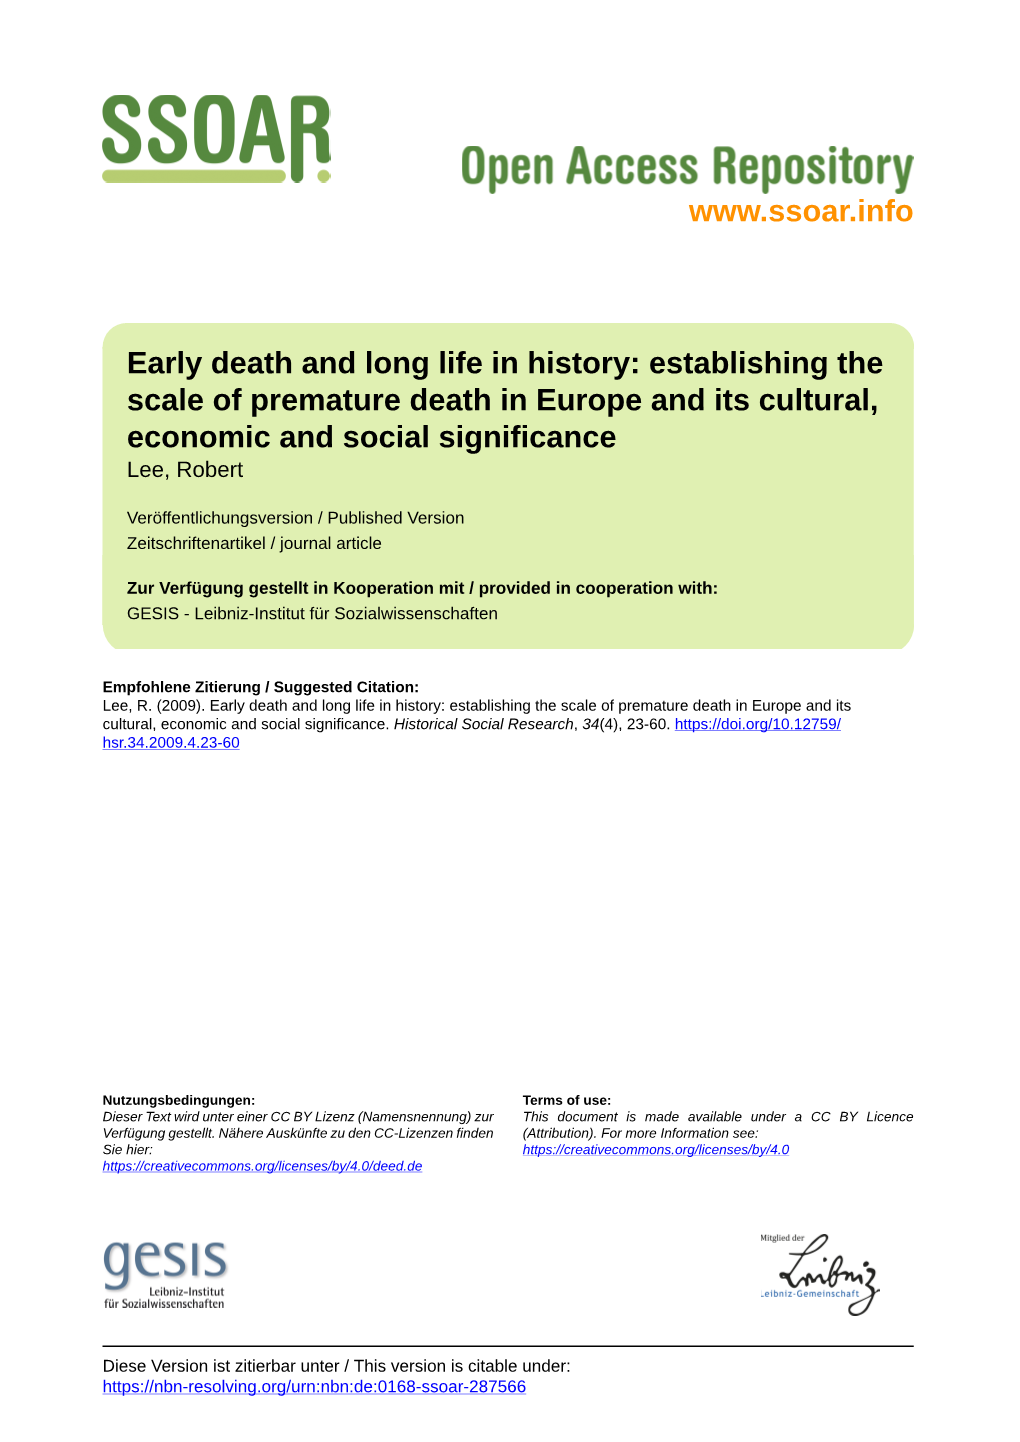 Establishing the Scale of Premature Death in Europe and Its Cultural, Economic and Social Significance Lee, Robert